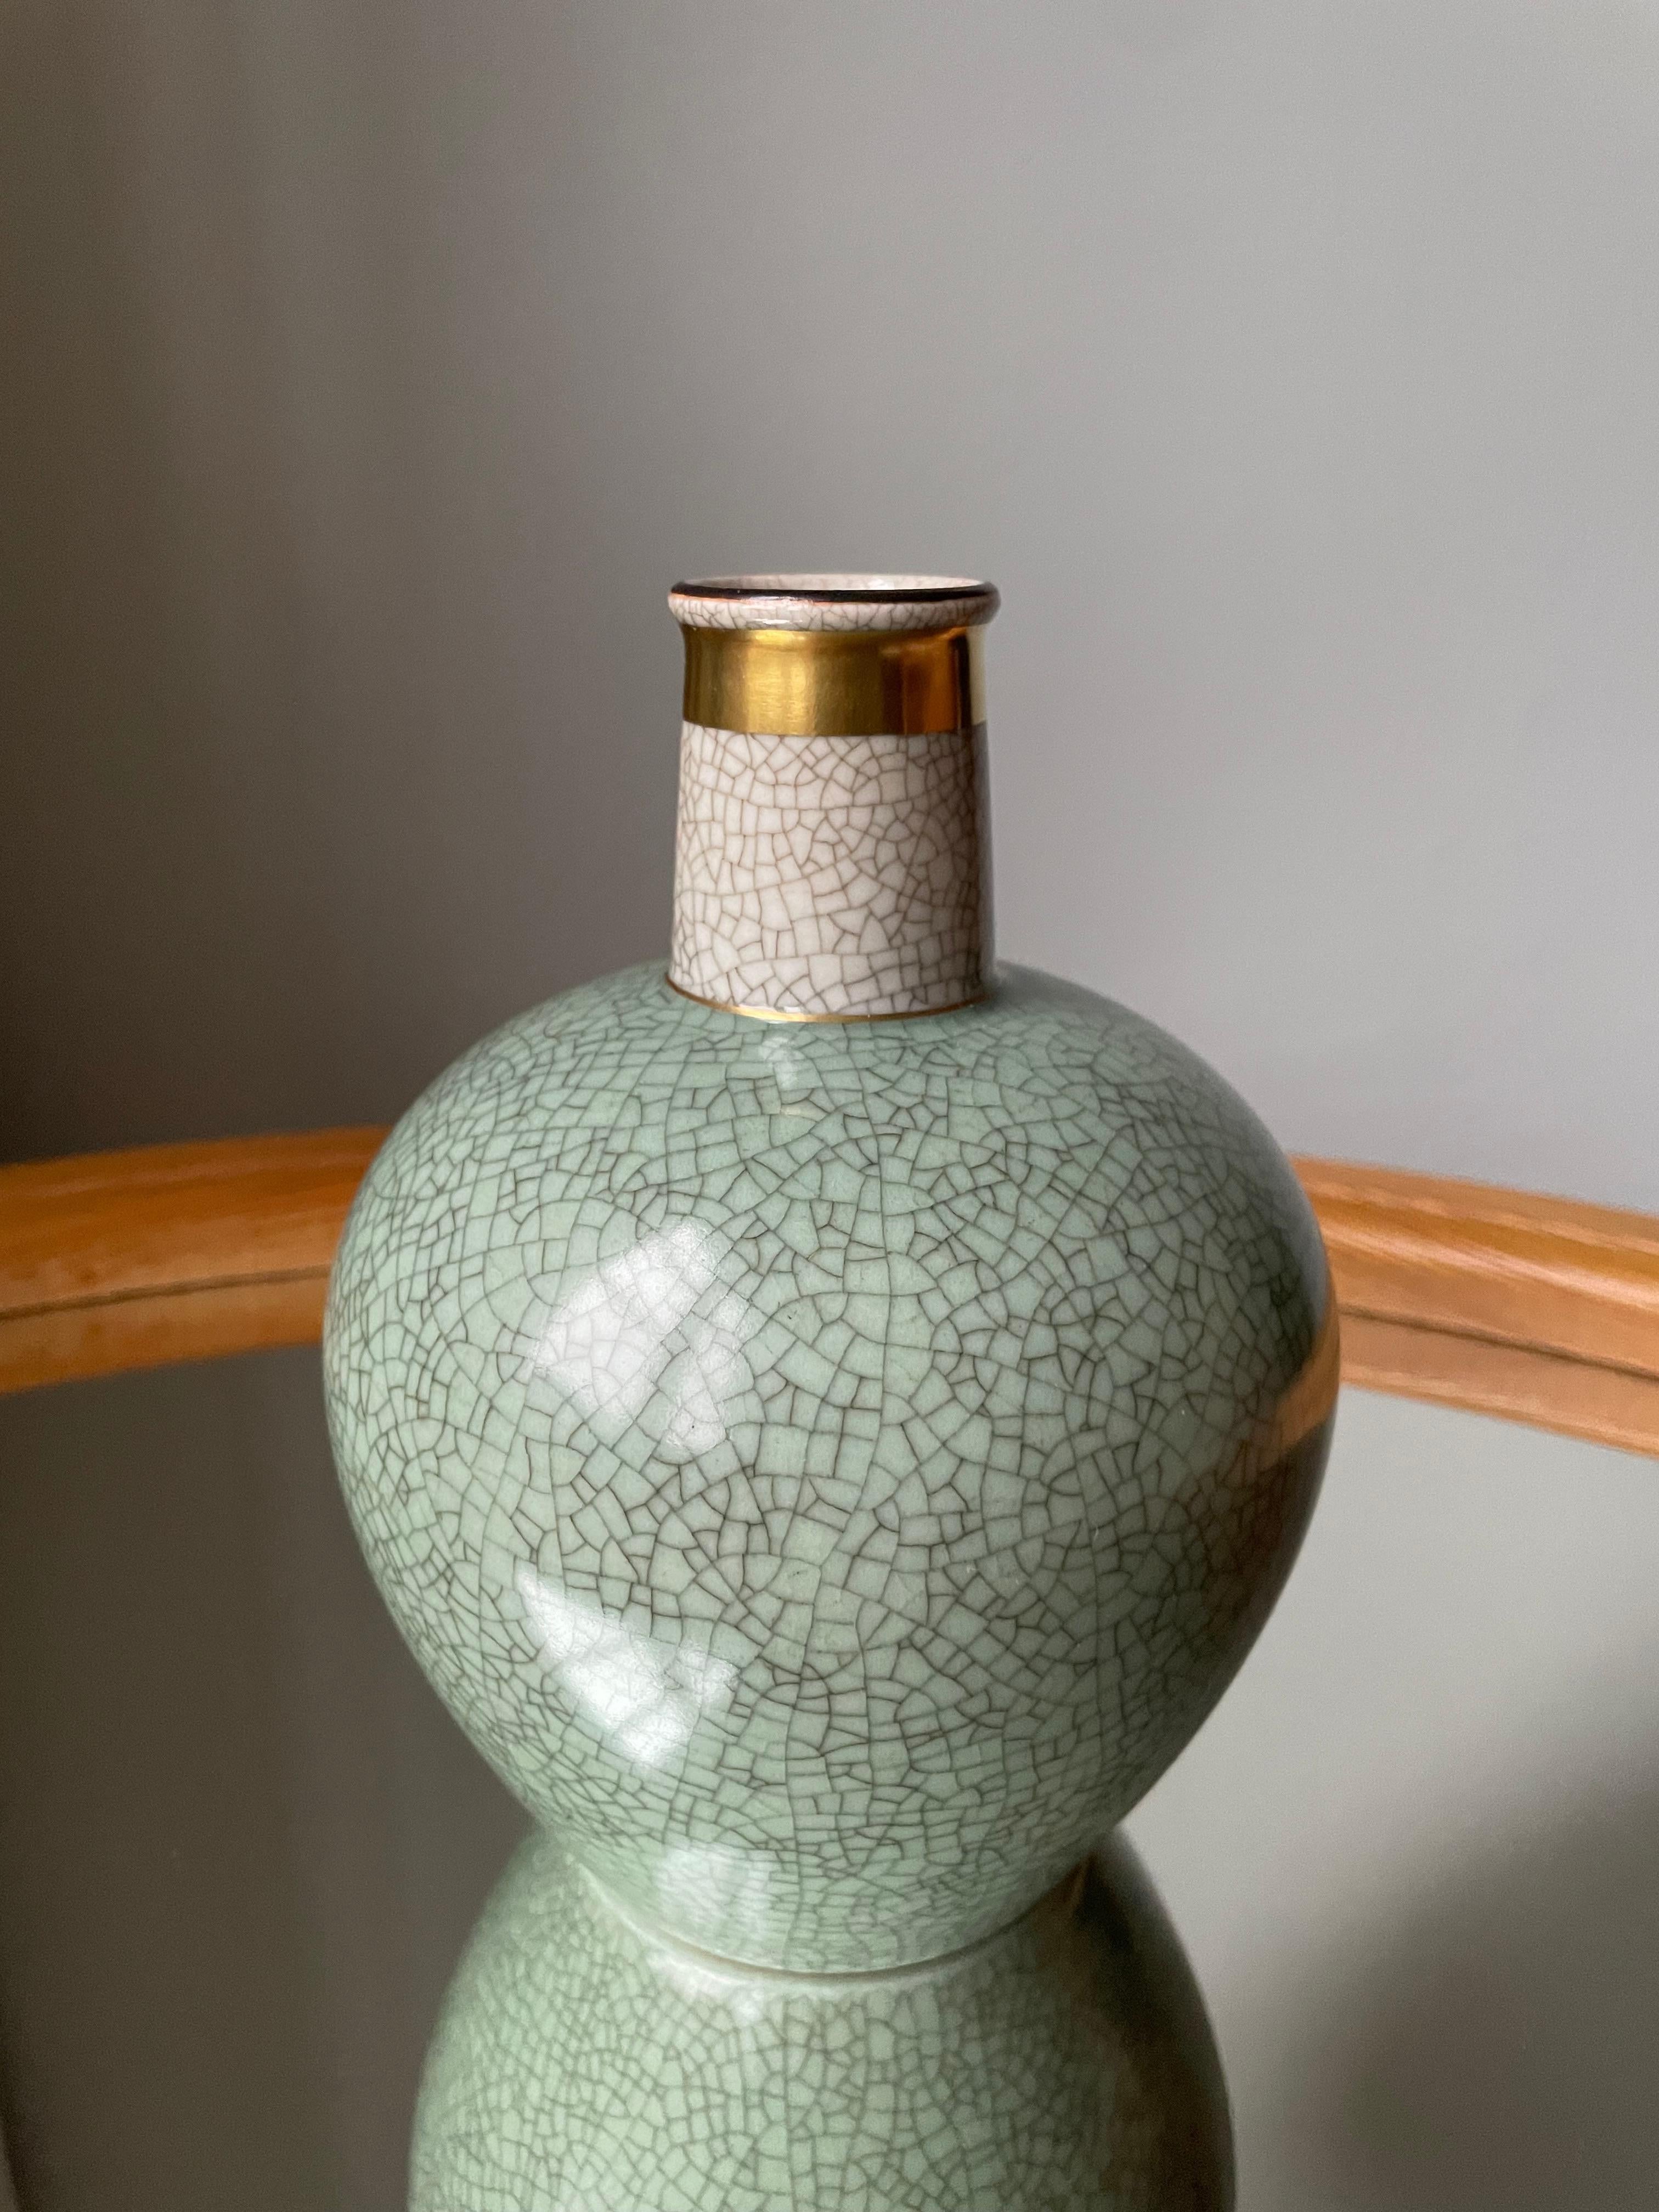 Vintage Royal Copenhagen porcelain vase with green and cream colored crackle glaze and simple decorative golden bands around top and base. Signed and stanped under base.
Beautiful, seemingly unused vintage condition. 
Denmark, 1950s.